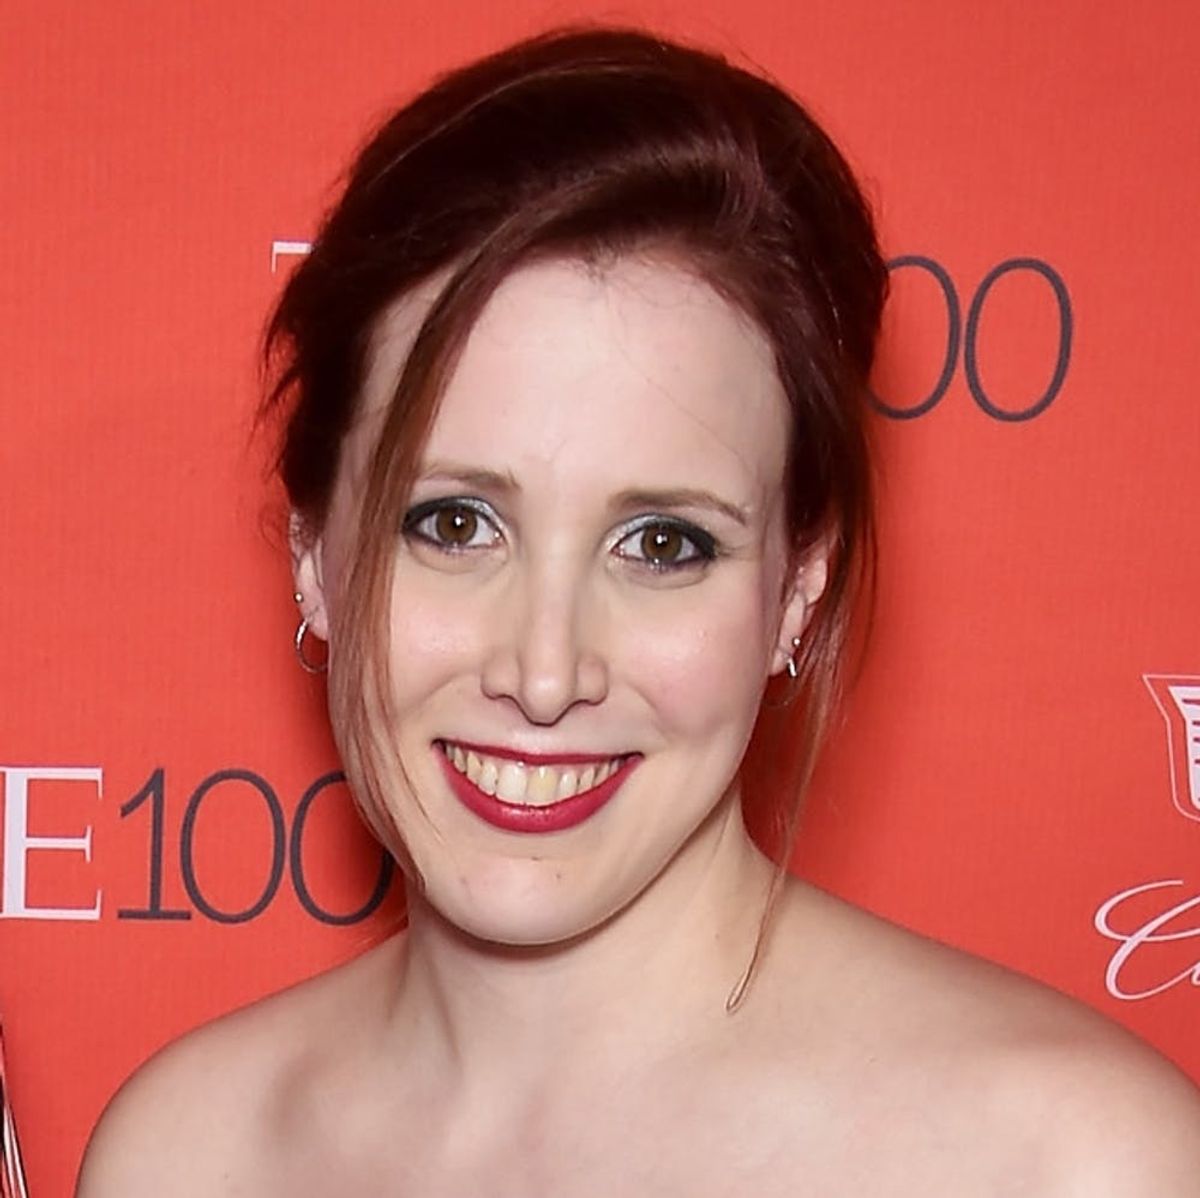 Dylan Farrow to Speak on ‘CBS This Morning’ About Alleged Woody Allen Abuse